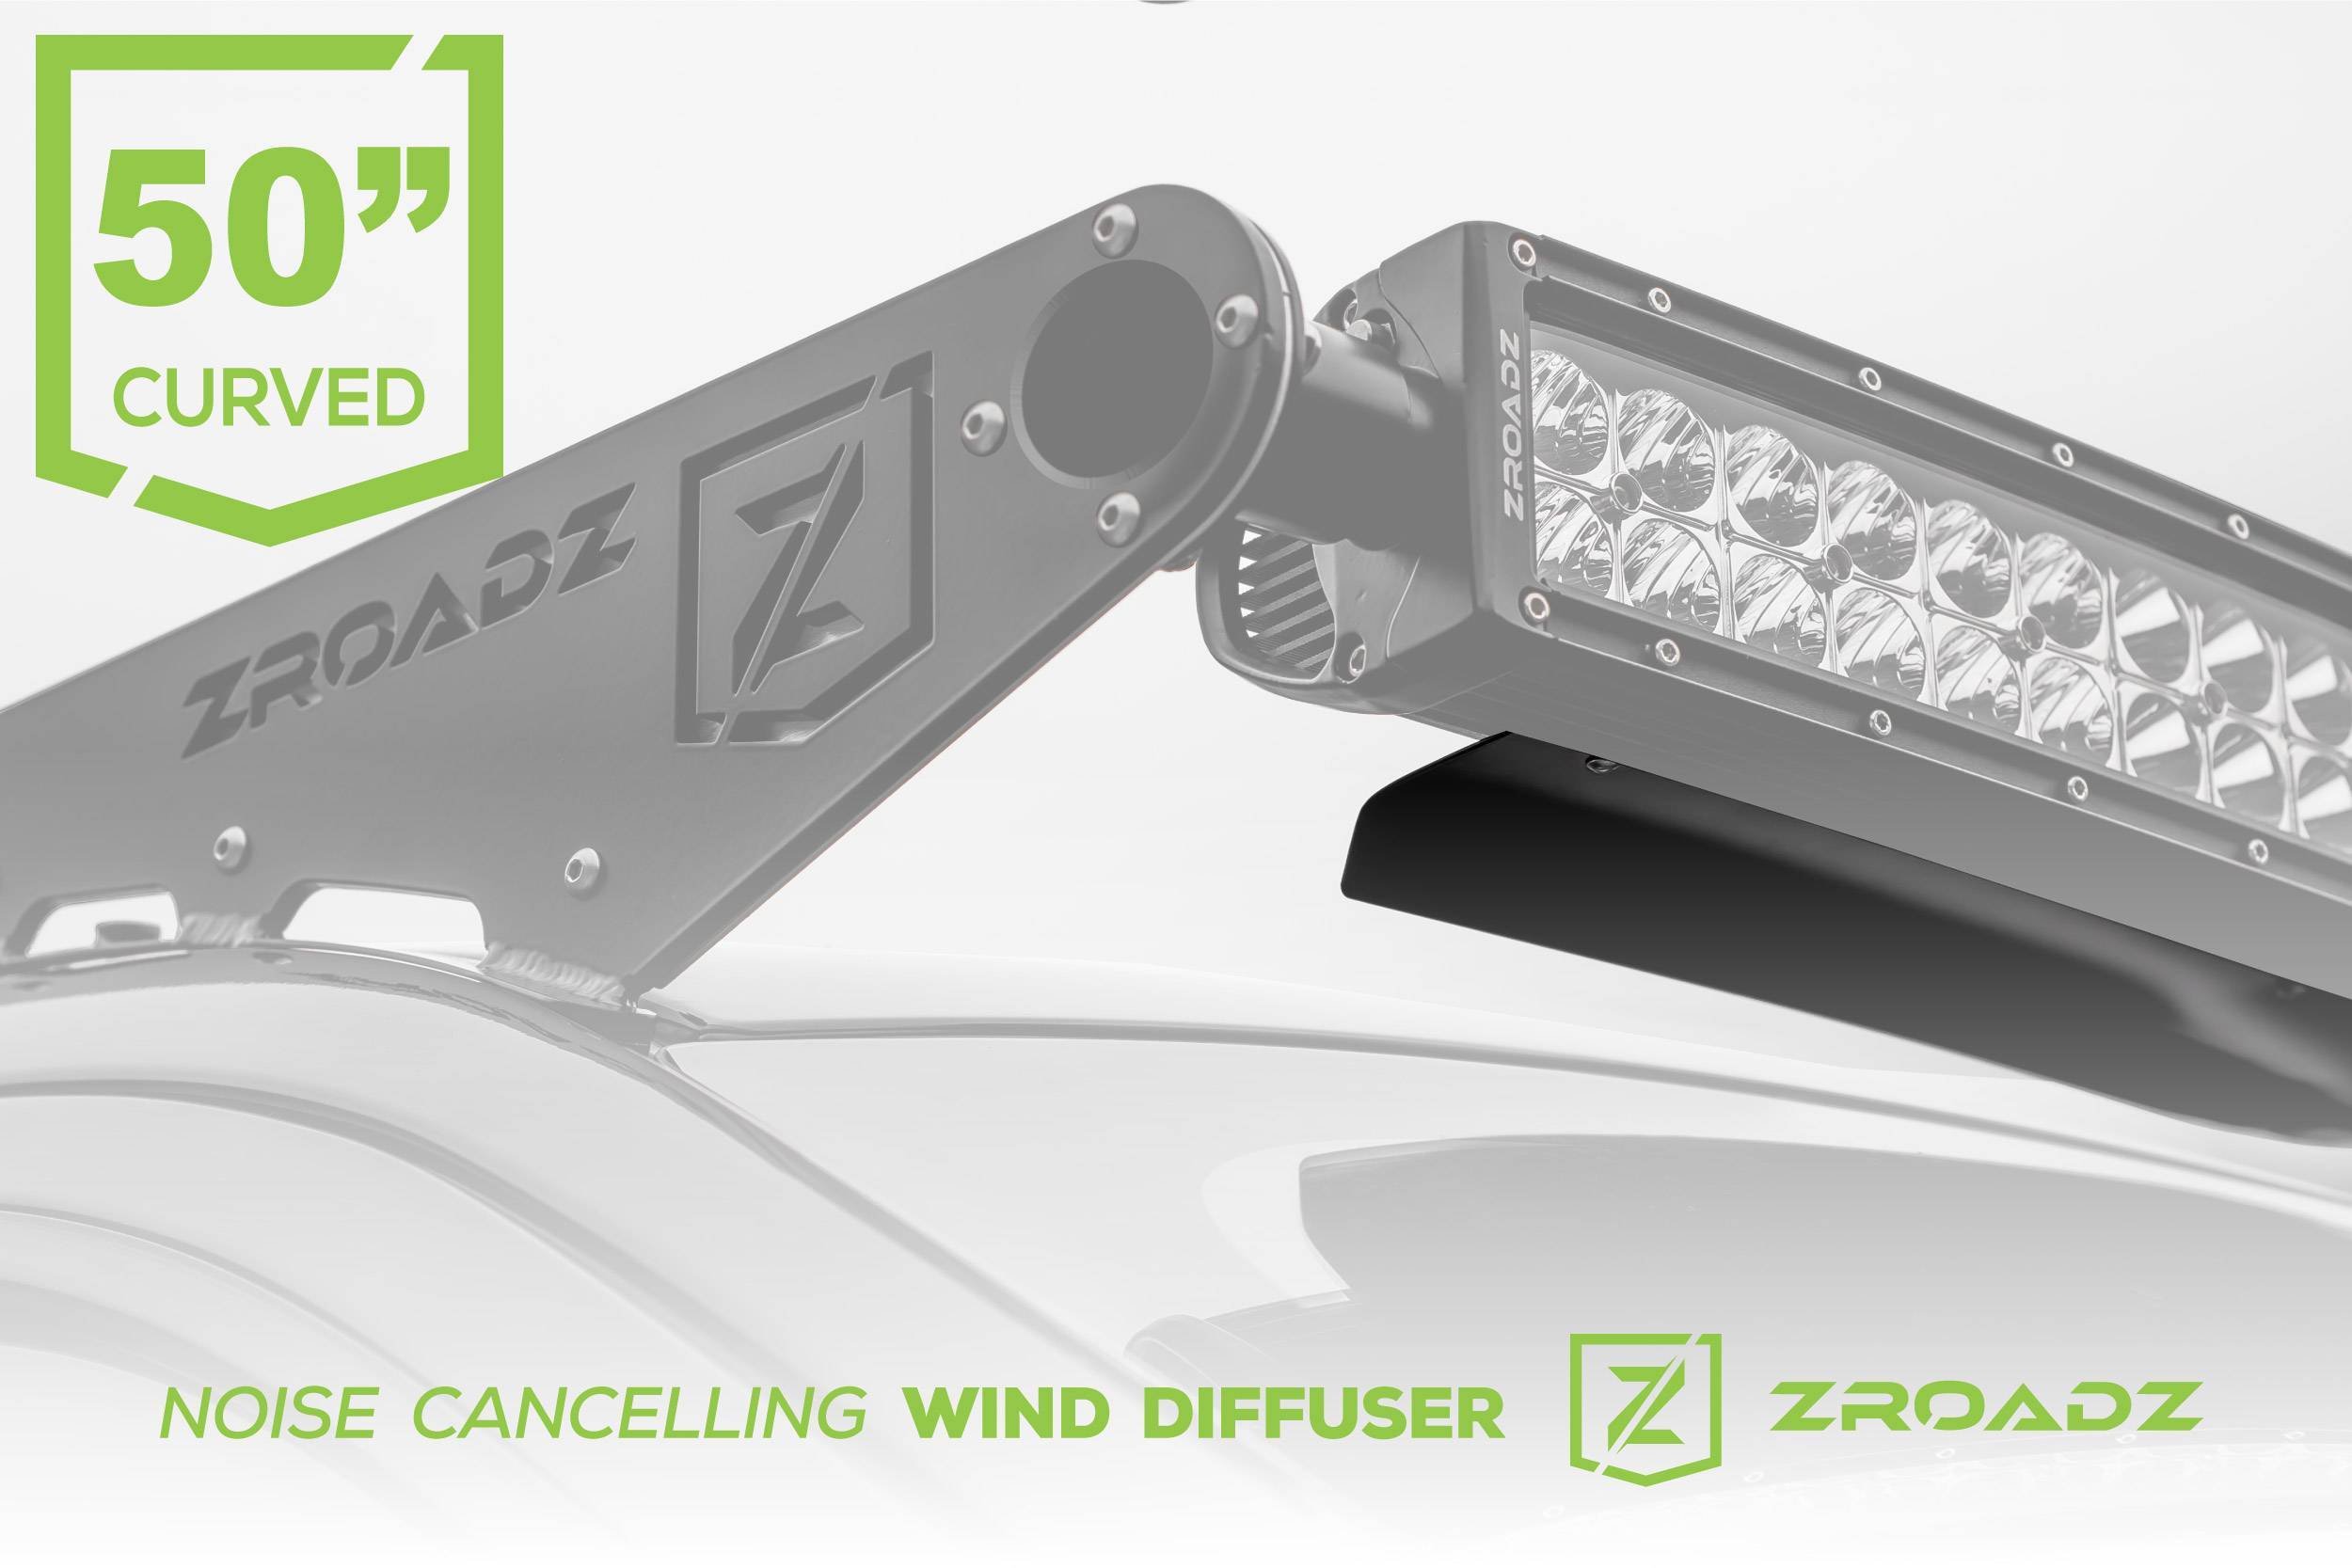 ZROADZ OFF ROAD PRODUCTS - Noise Cancelling Wind Diffuser for 50 Inch Curved LED Light Bar - PN #Z330050C